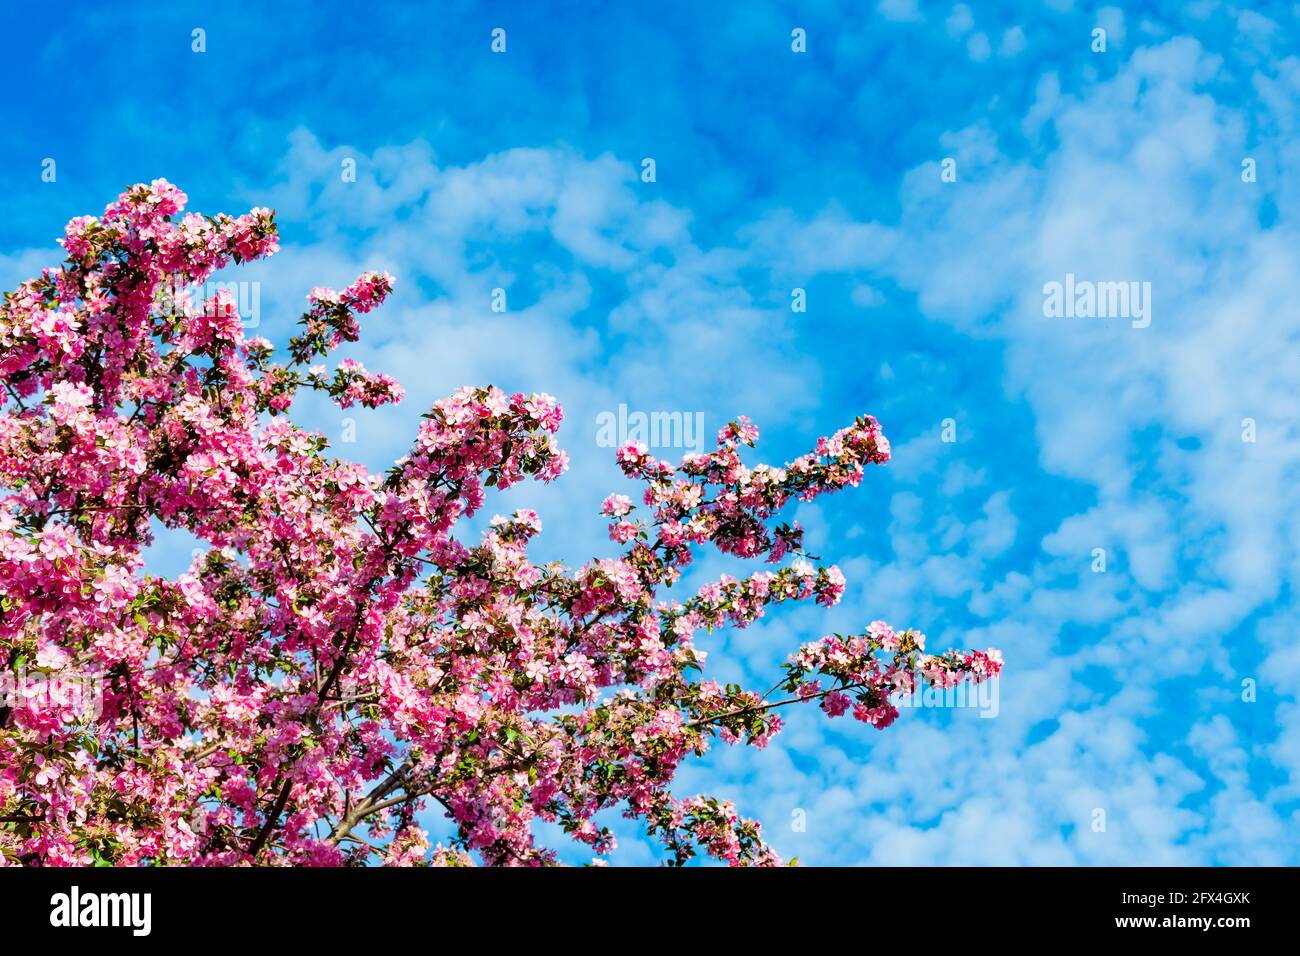 Beautiful view of flowering apple tree with blue sky in the background Stock Photo